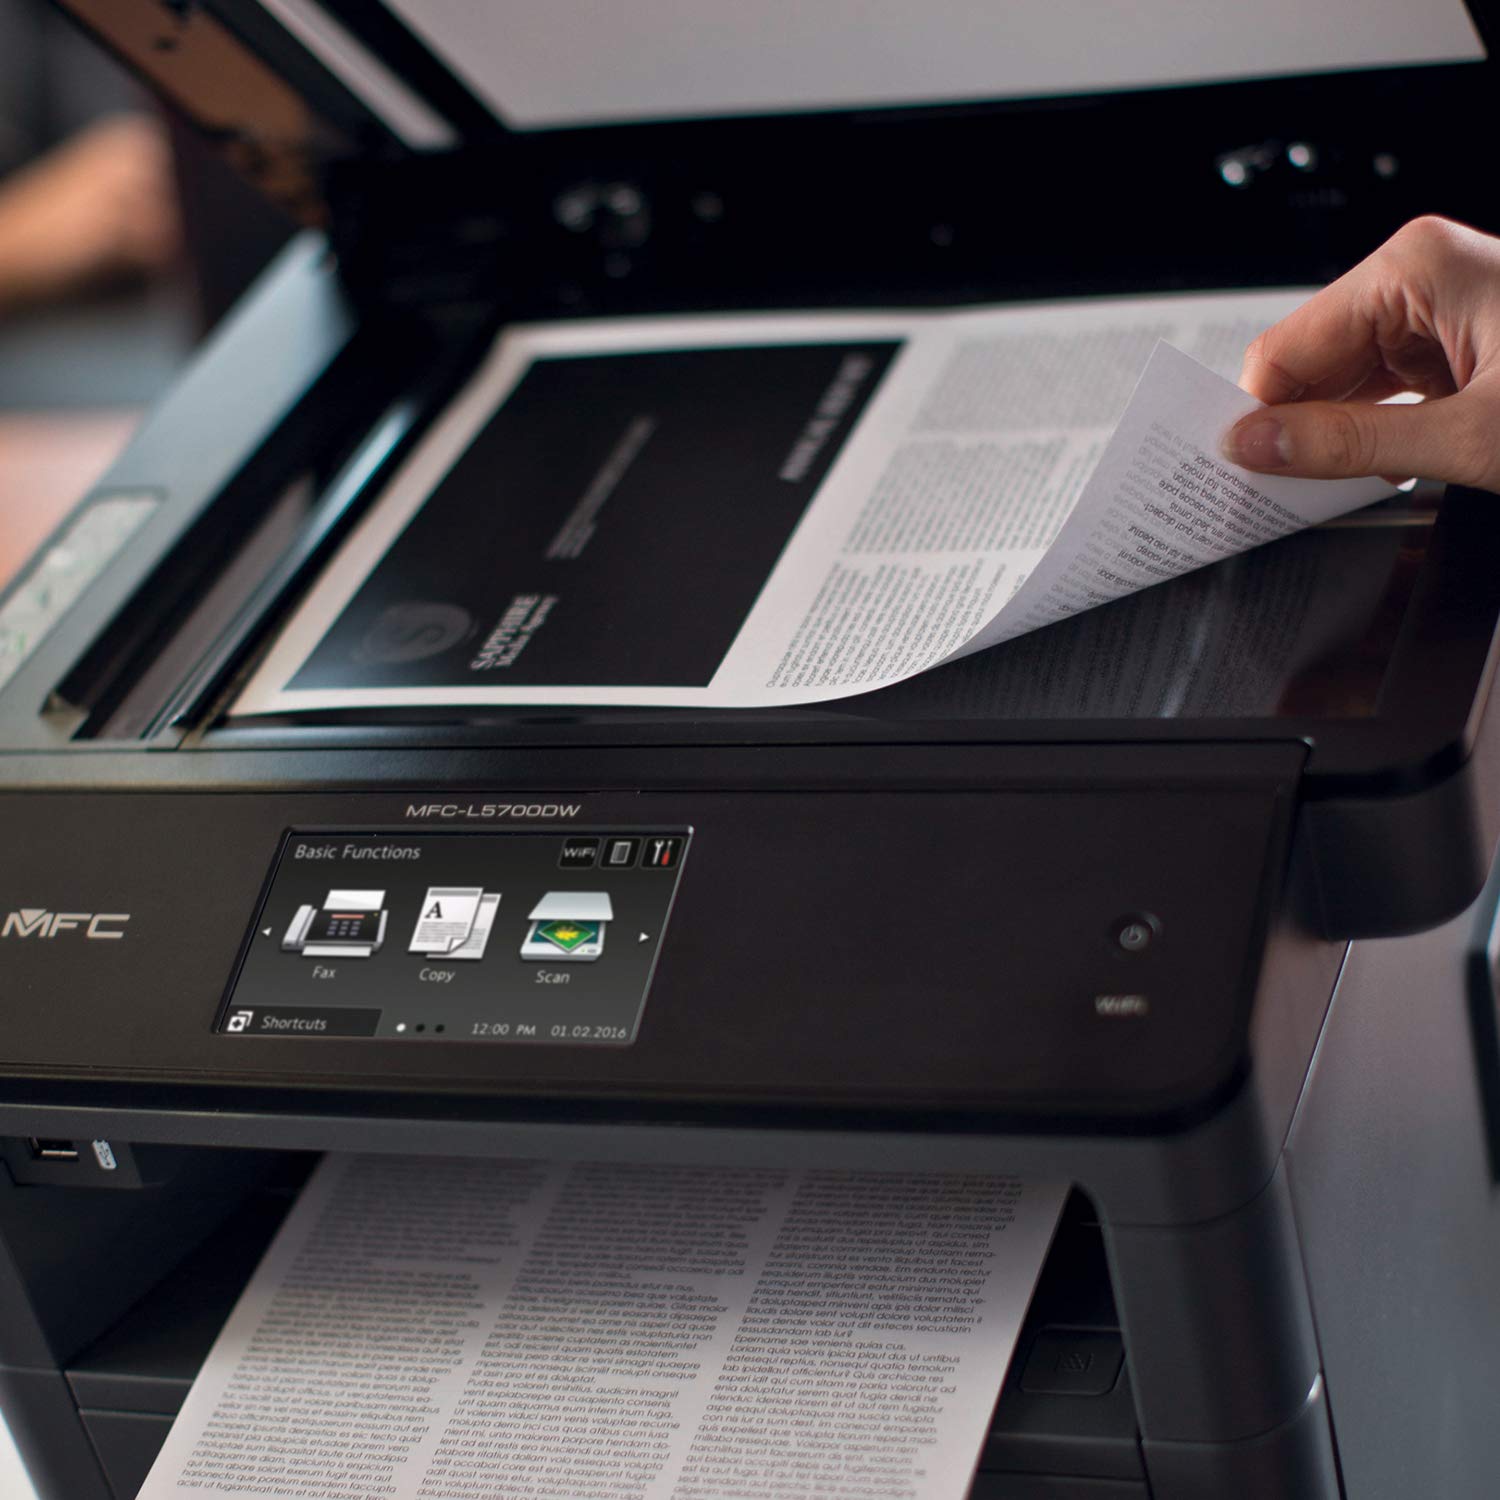 Brother Monochrome Laser Multifunction All-in-One Printer, MFC-L5700DW, Flexible Network Connectivity